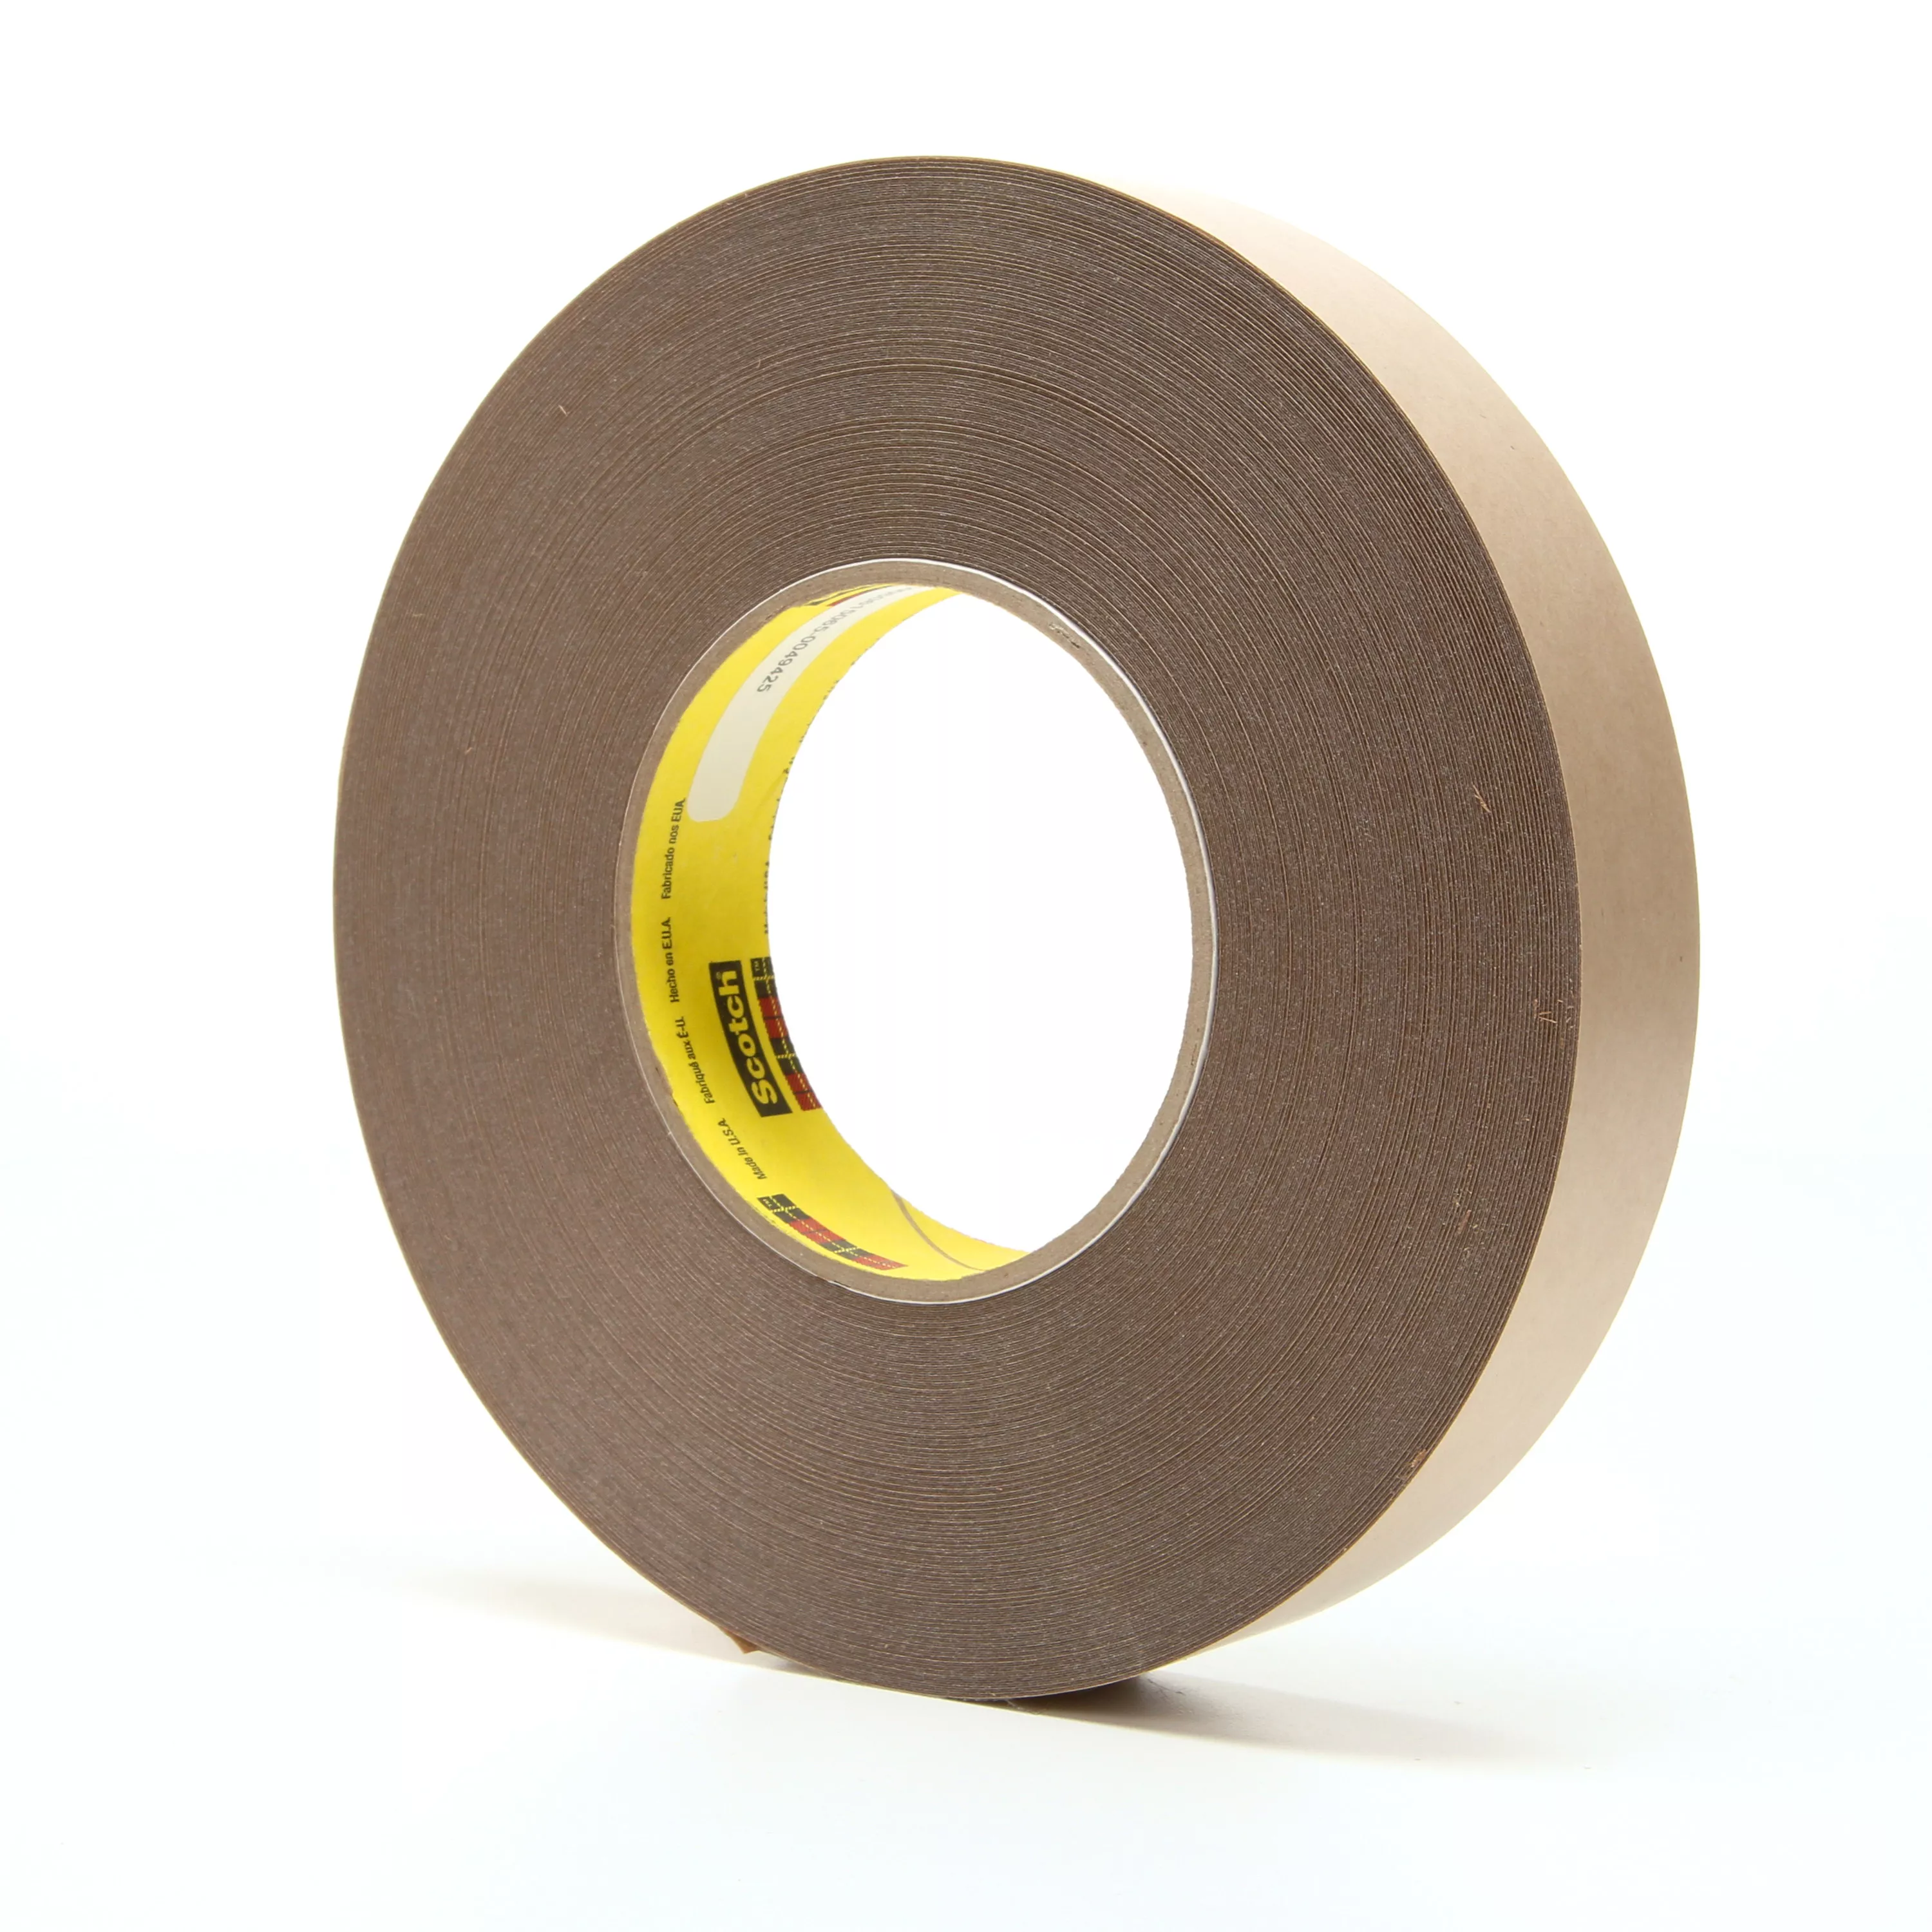 3M™ Removable Repositionable Tape 9425, Clear, 3 in x 72 yd, 5.8 mil, 3
Roll/Case